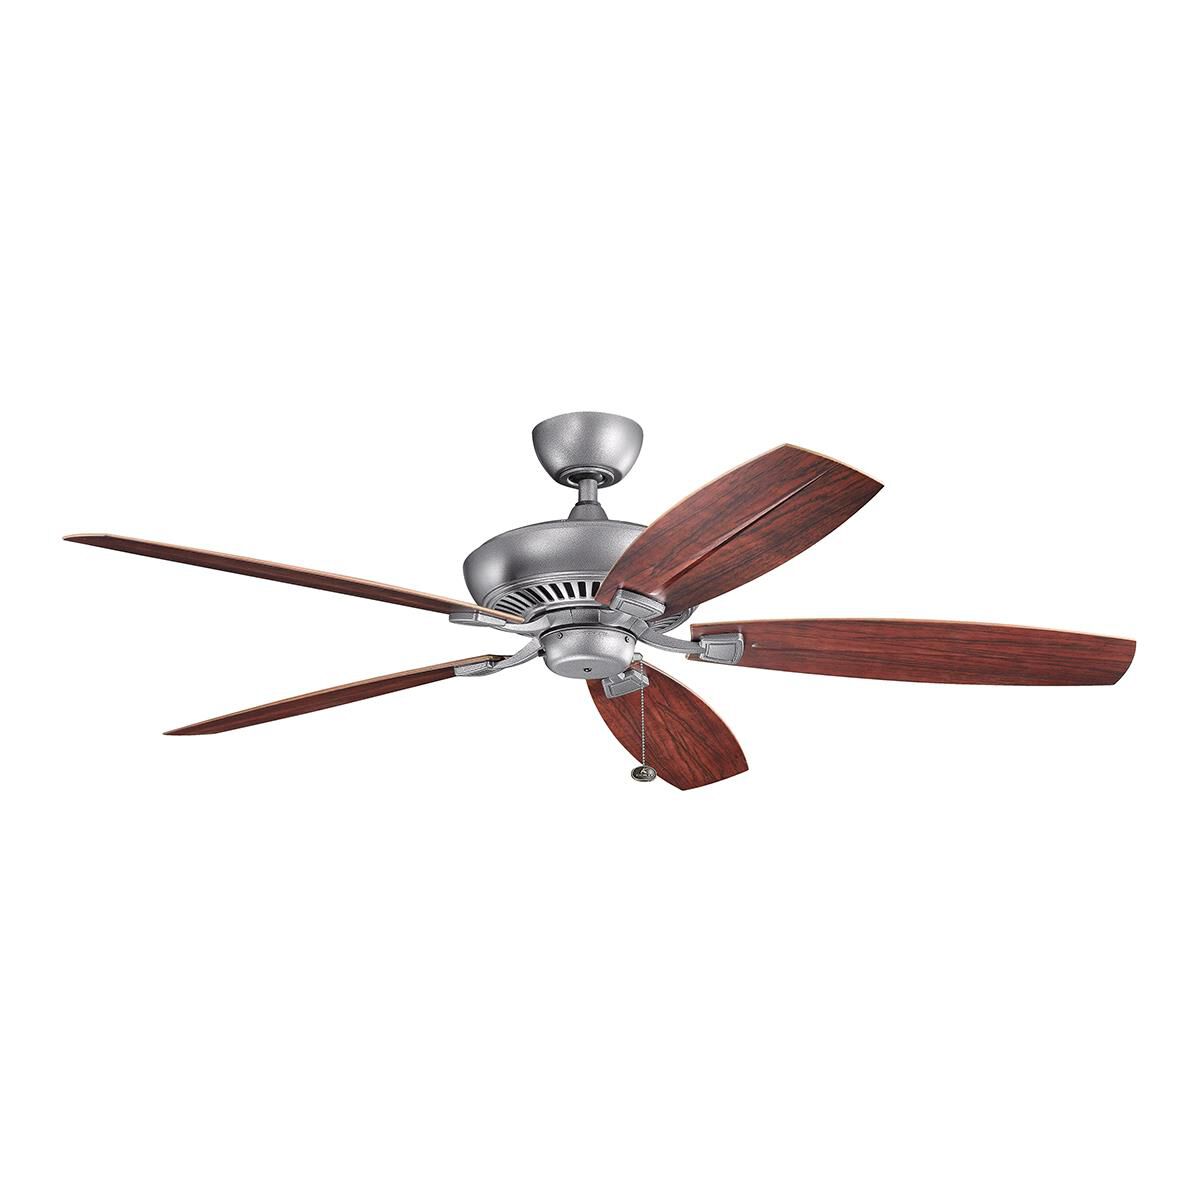 Photos - Fan Kichler Lighting Canfield 60 Inch Ceiling  Canfield - 310193WSP - Tradi 